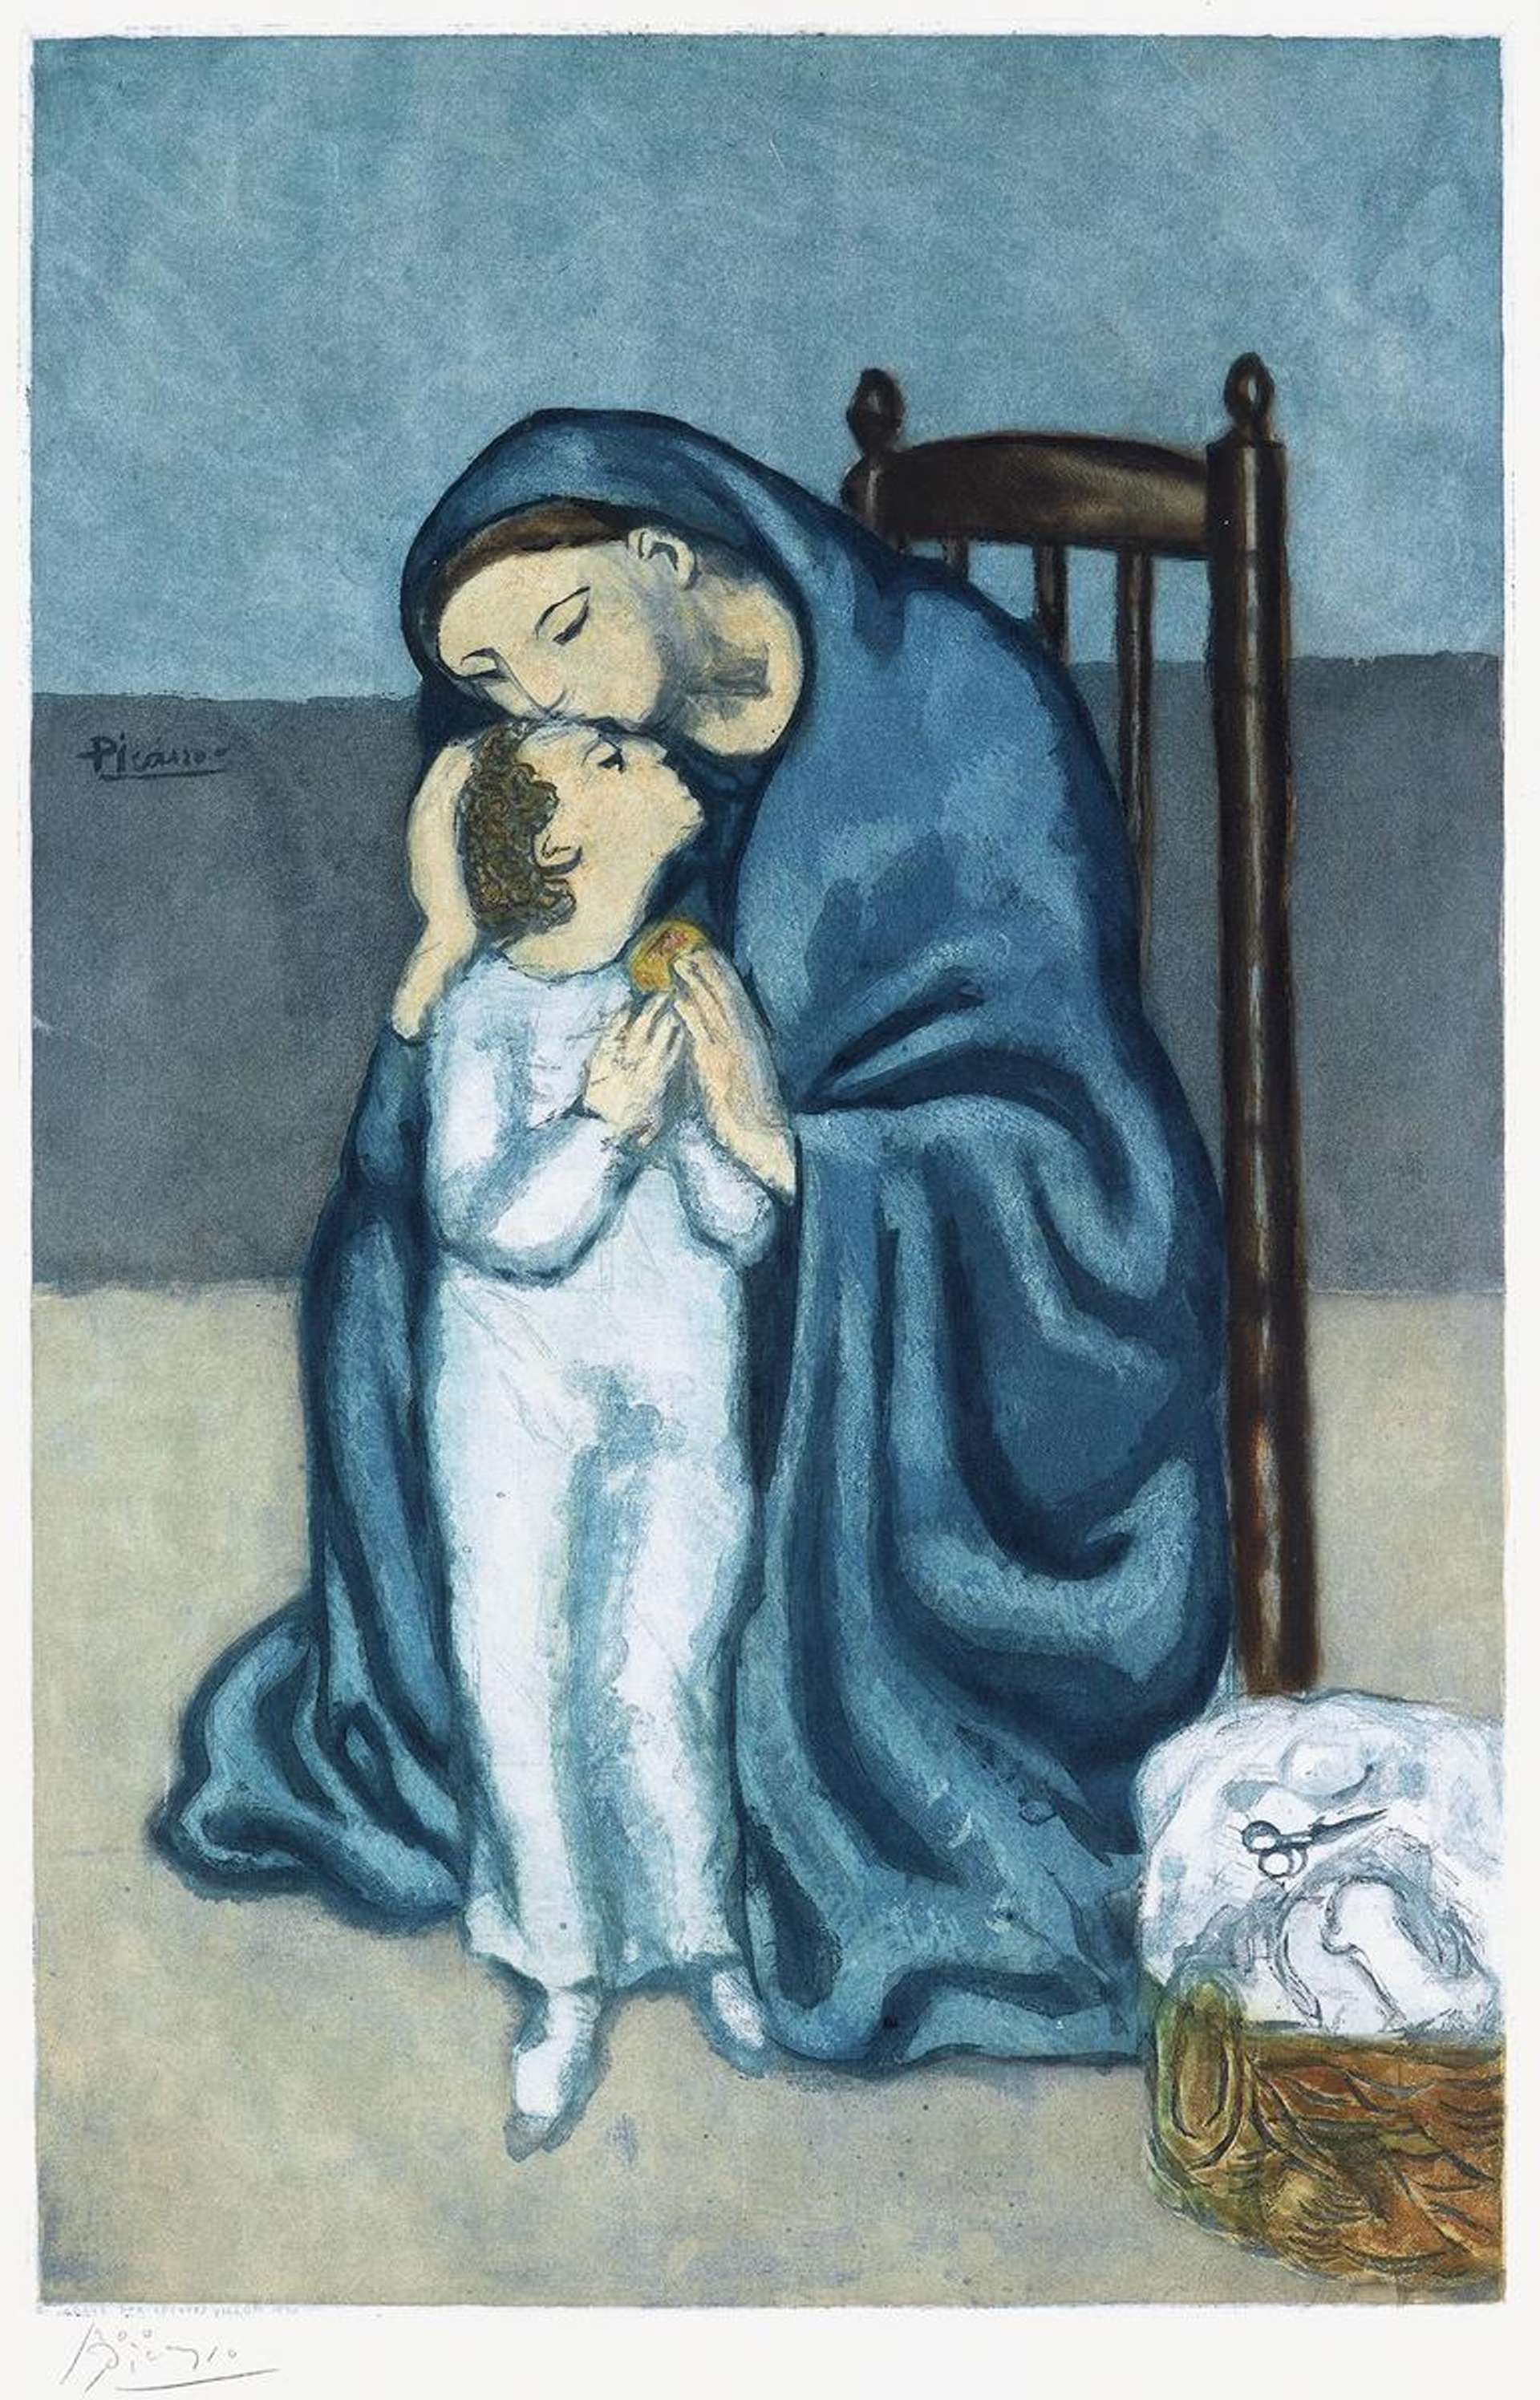 This print shows a mother and child, depicted in cool tones typical of Picasso's blue period. The mother is dressed in a blue cloak reminiscent of traditional depictions of the Virgin Mary.